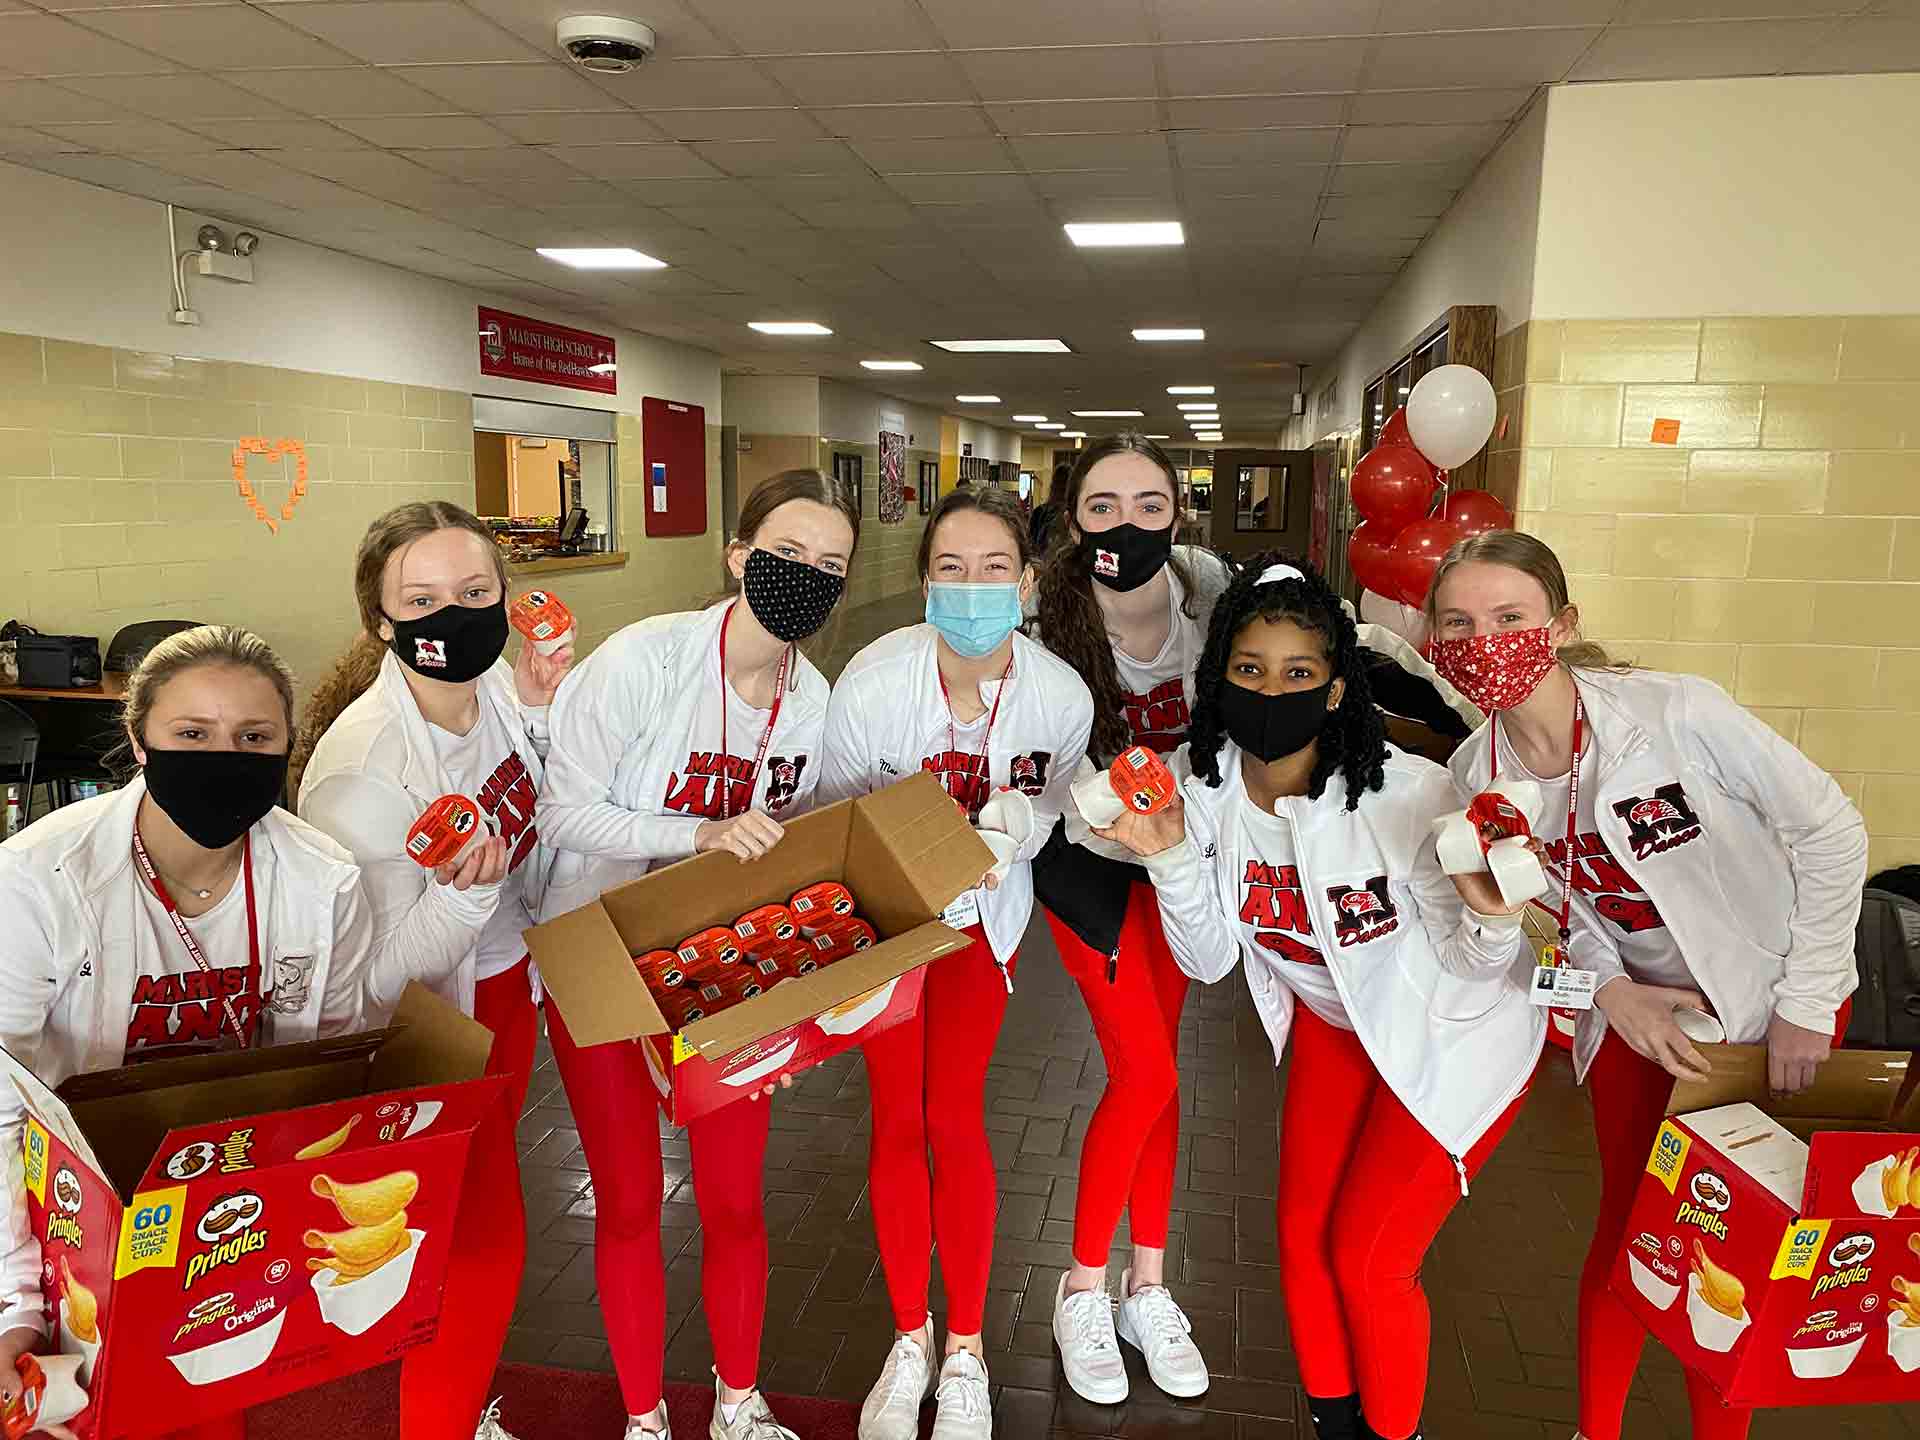 champagnat-day-2021-poms-group-photo-with-food-boxes